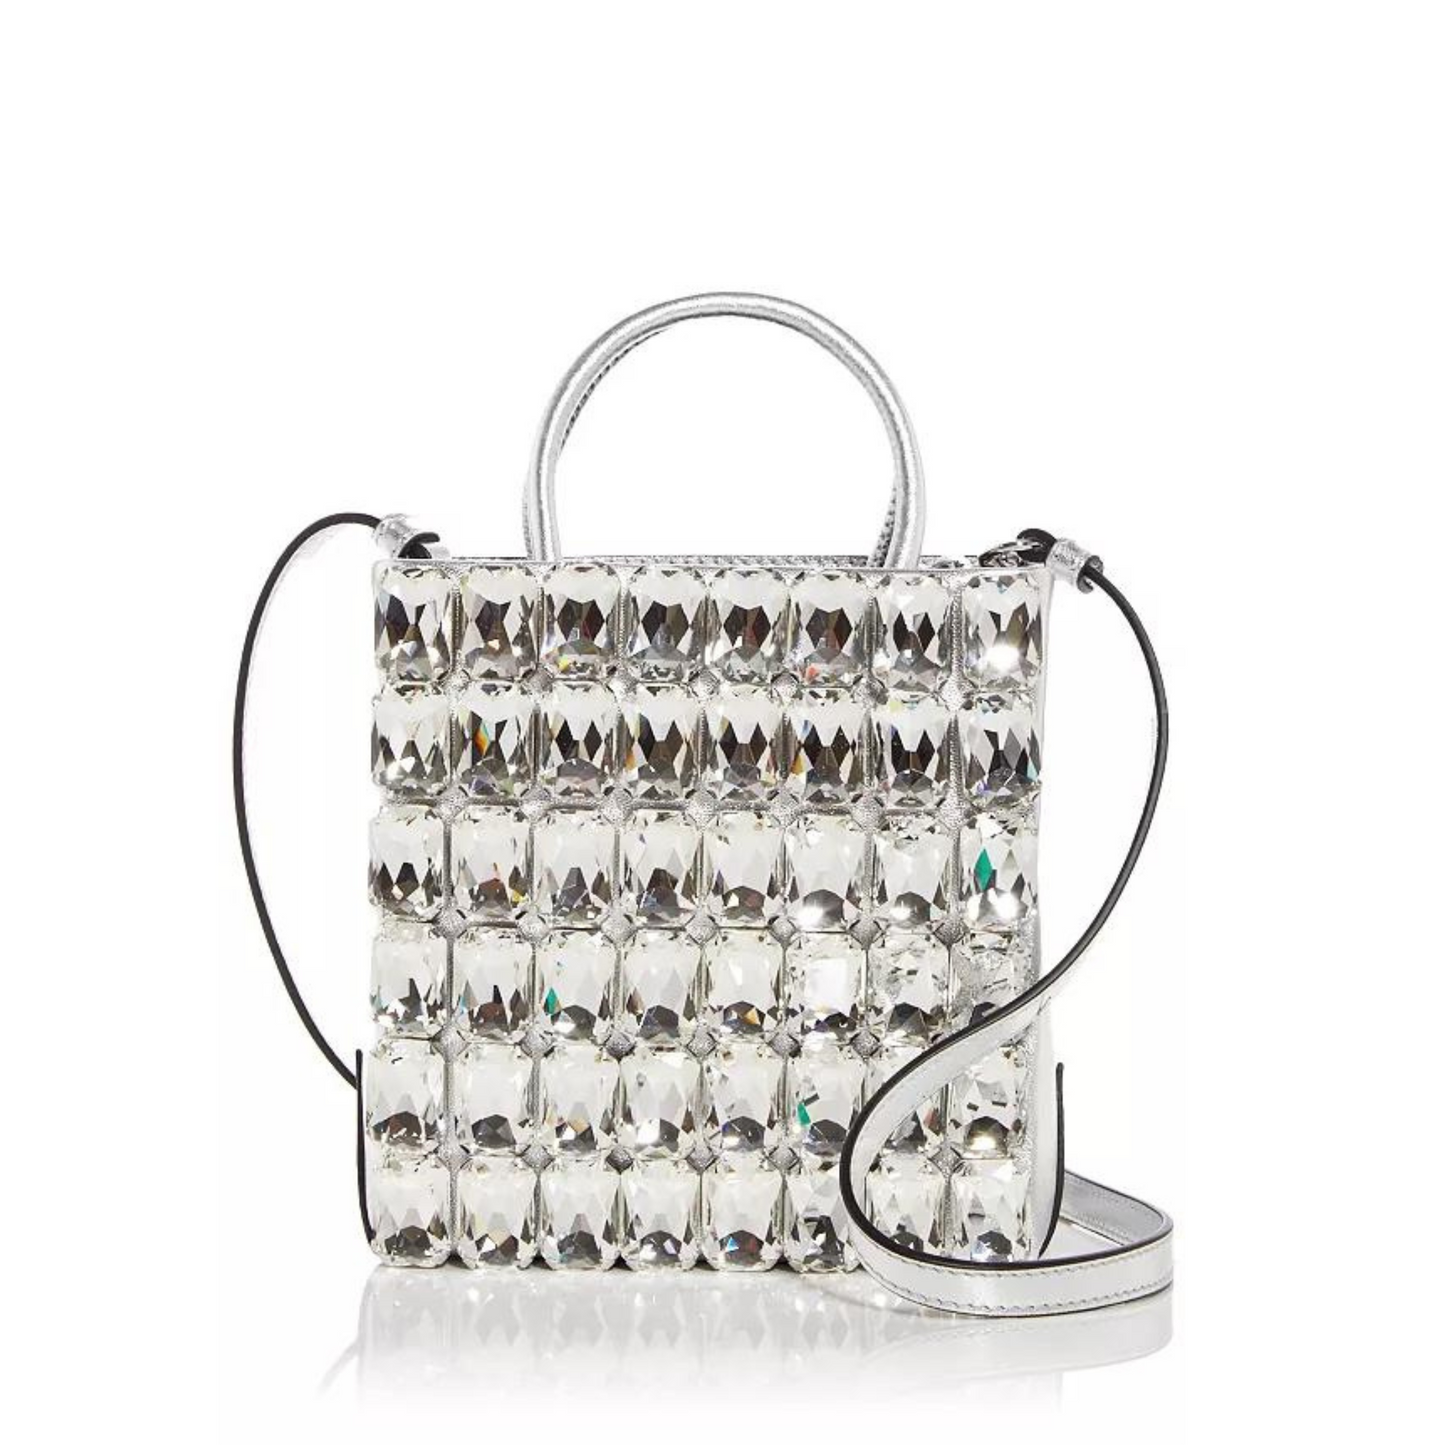 Moschino - Embellished Leather Crossbody Tote